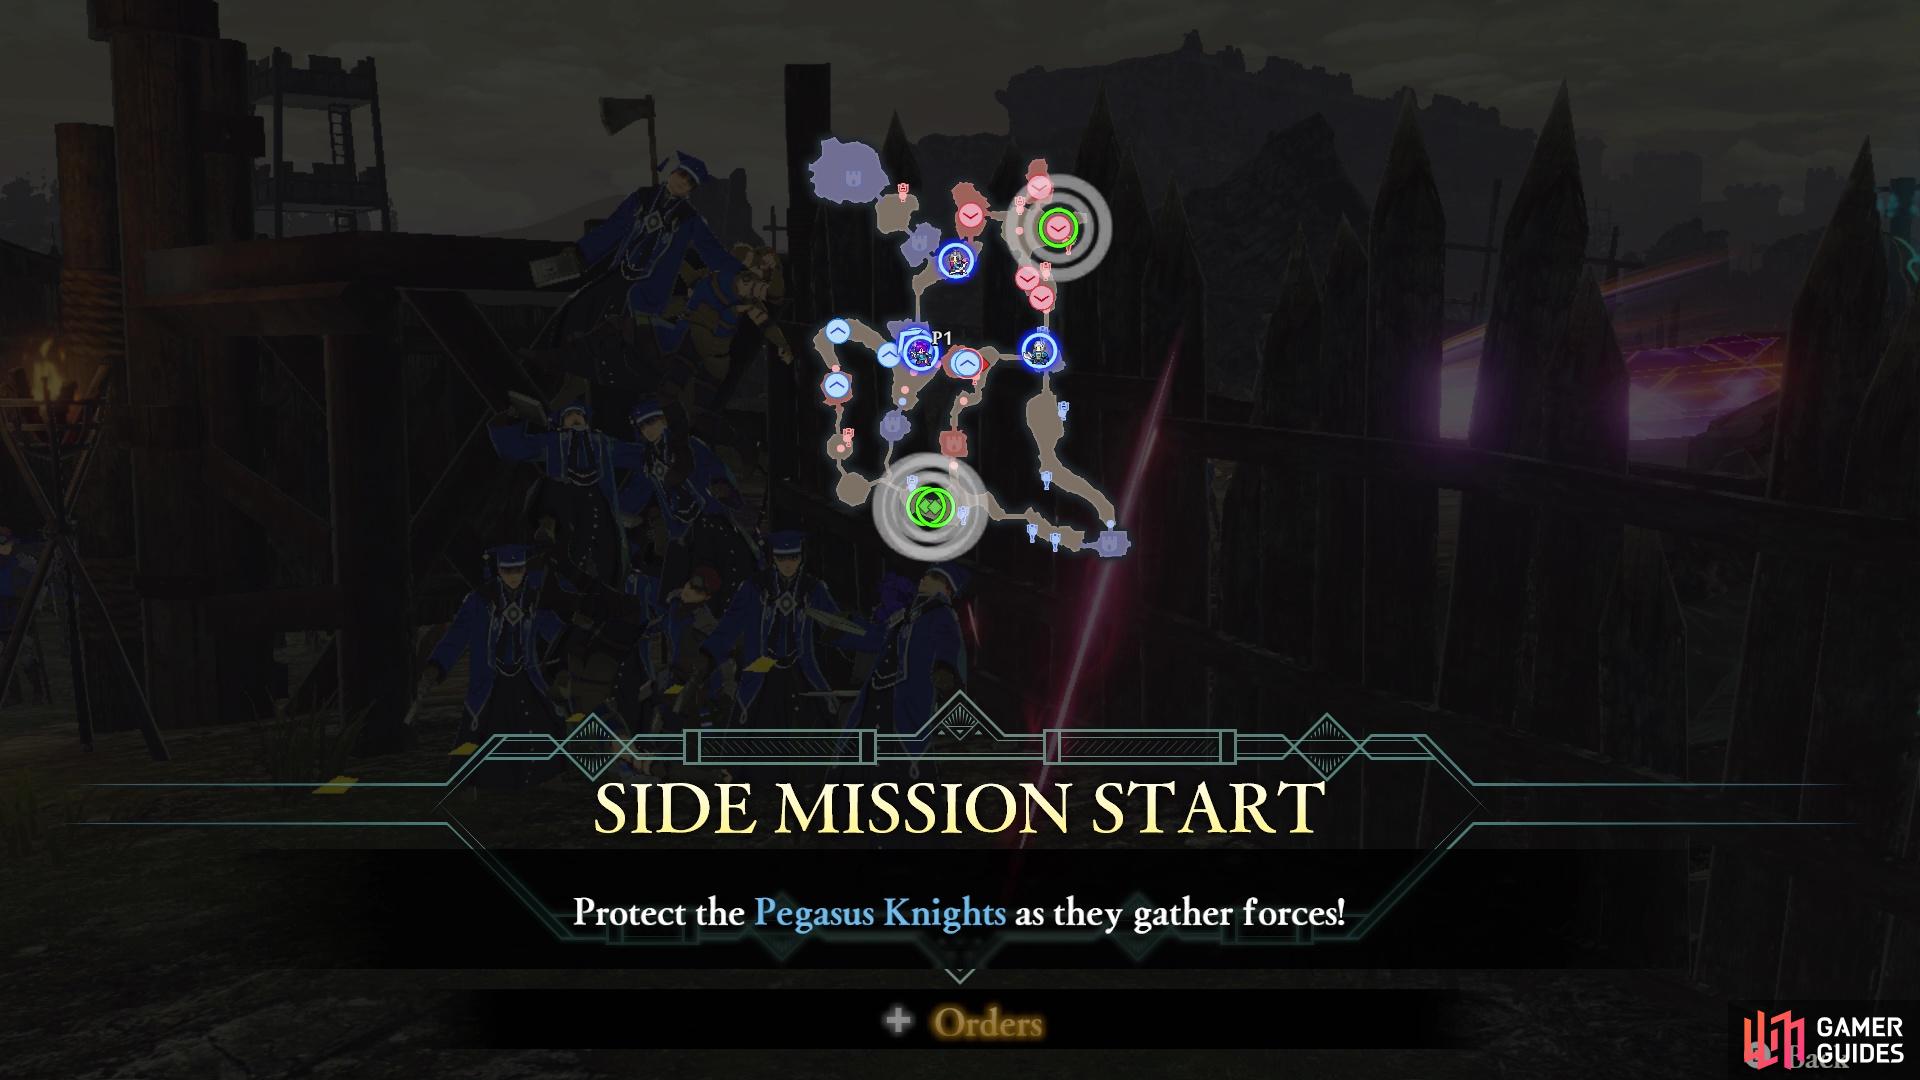 The Pegasus Knights will spawn in two areas